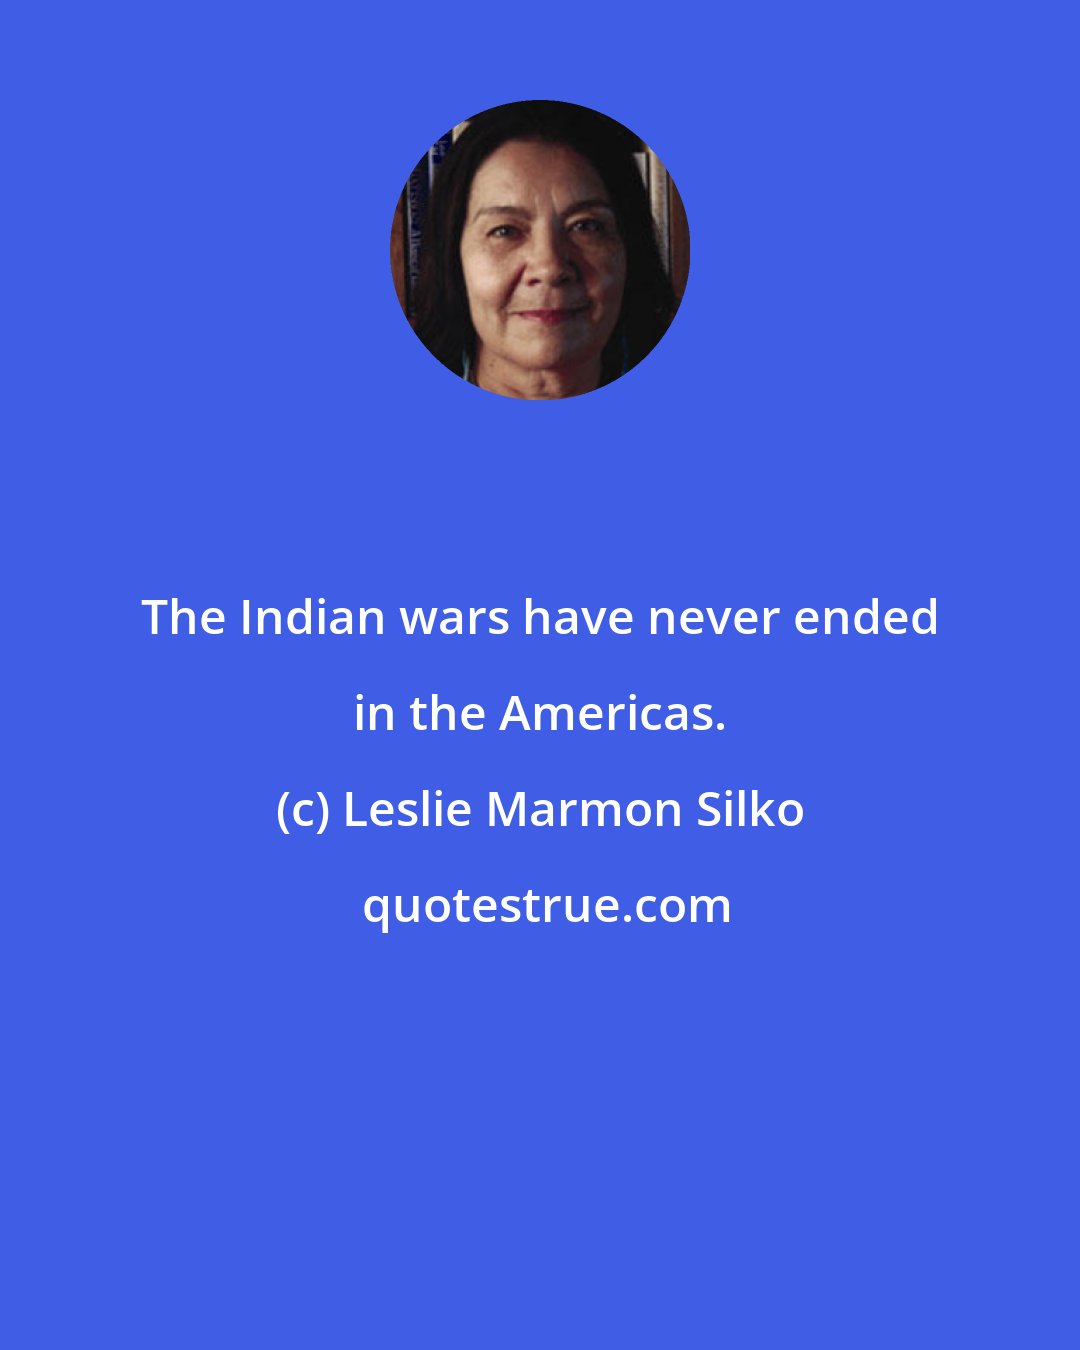 Leslie Marmon Silko: The Indian wars have never ended in the Americas.